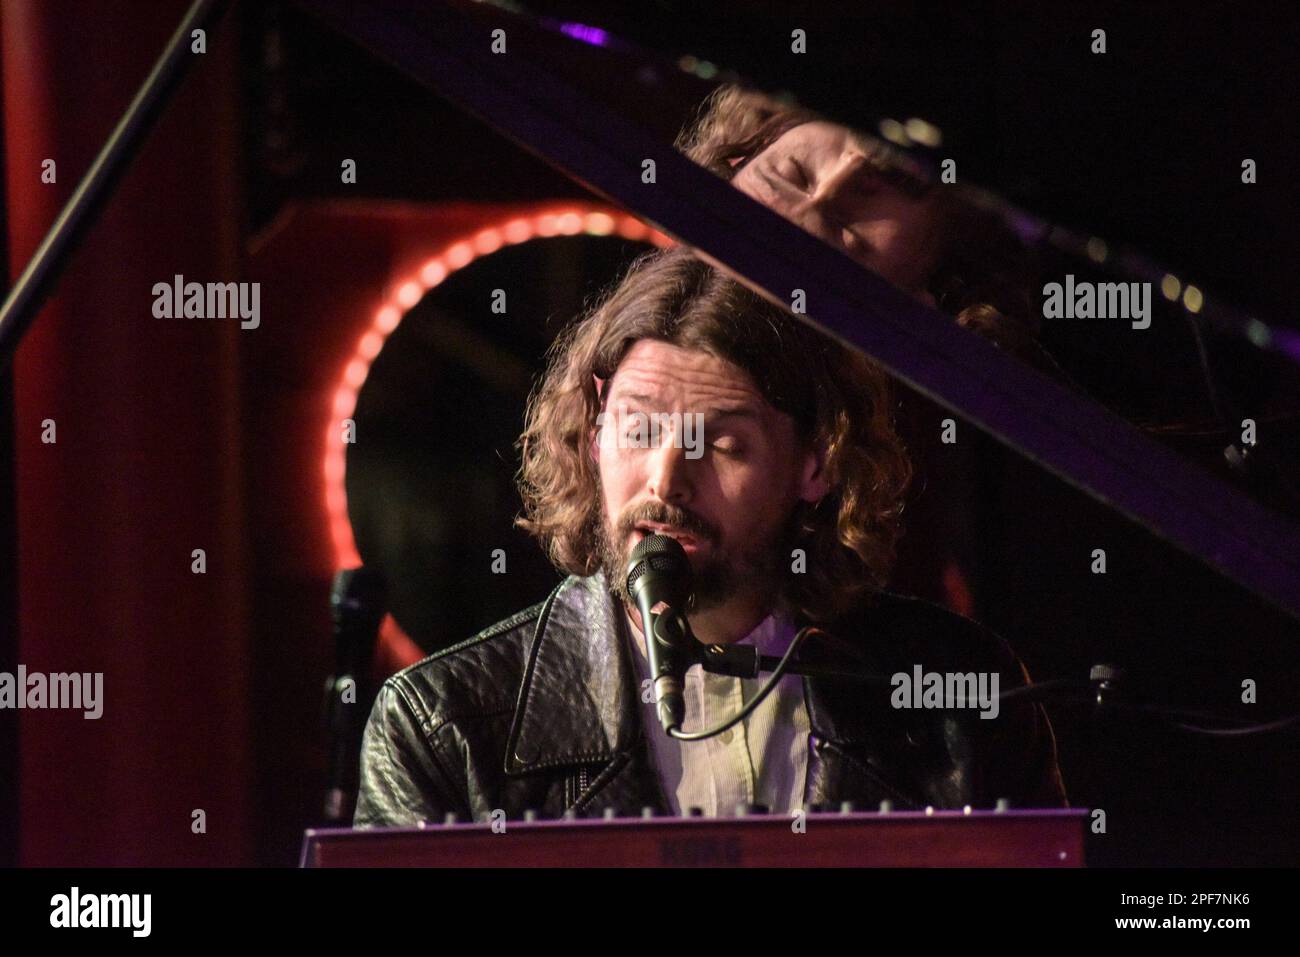 Jarrod Lawson is a composer, keyboardist, and singer who is heavily inspired by the likes of Stevie Wonder and Donny Hathaway. Stock Photo